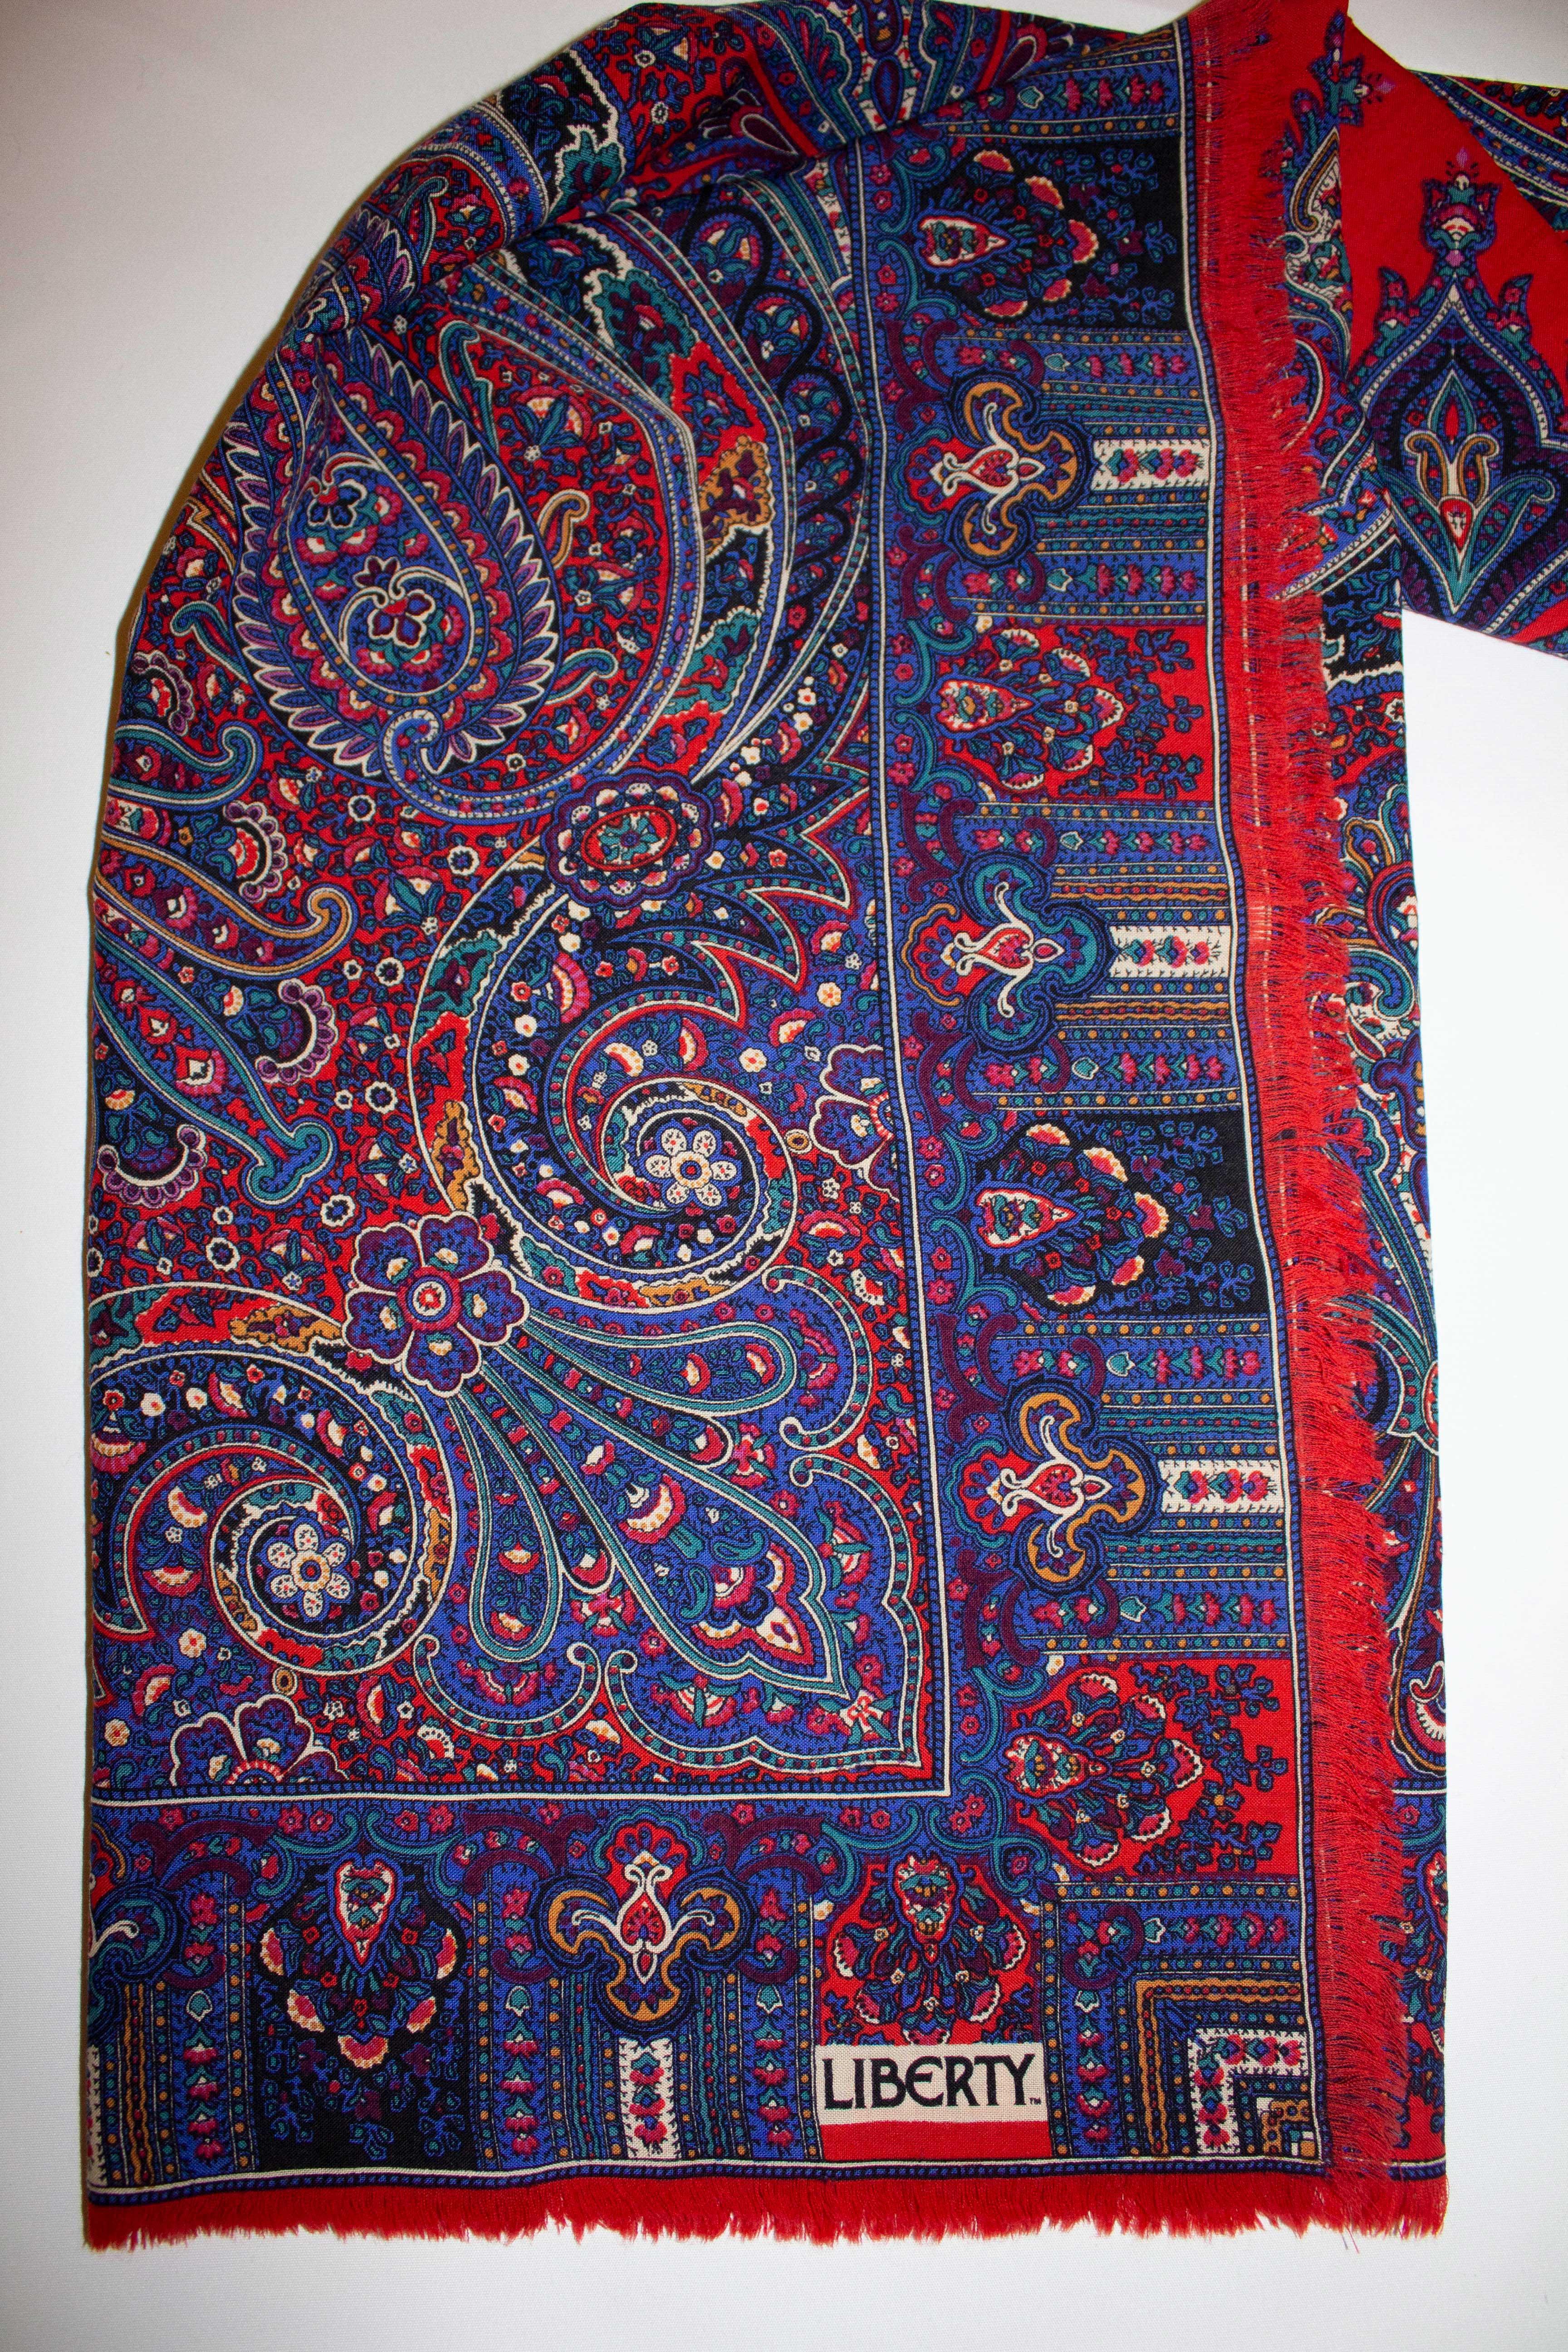 A wonderful , classic vintage Liberty of London wool scarf.  The scarf is in a red , blue , turquoise and lilac design with fringing. Measurements:  52'' x 52''